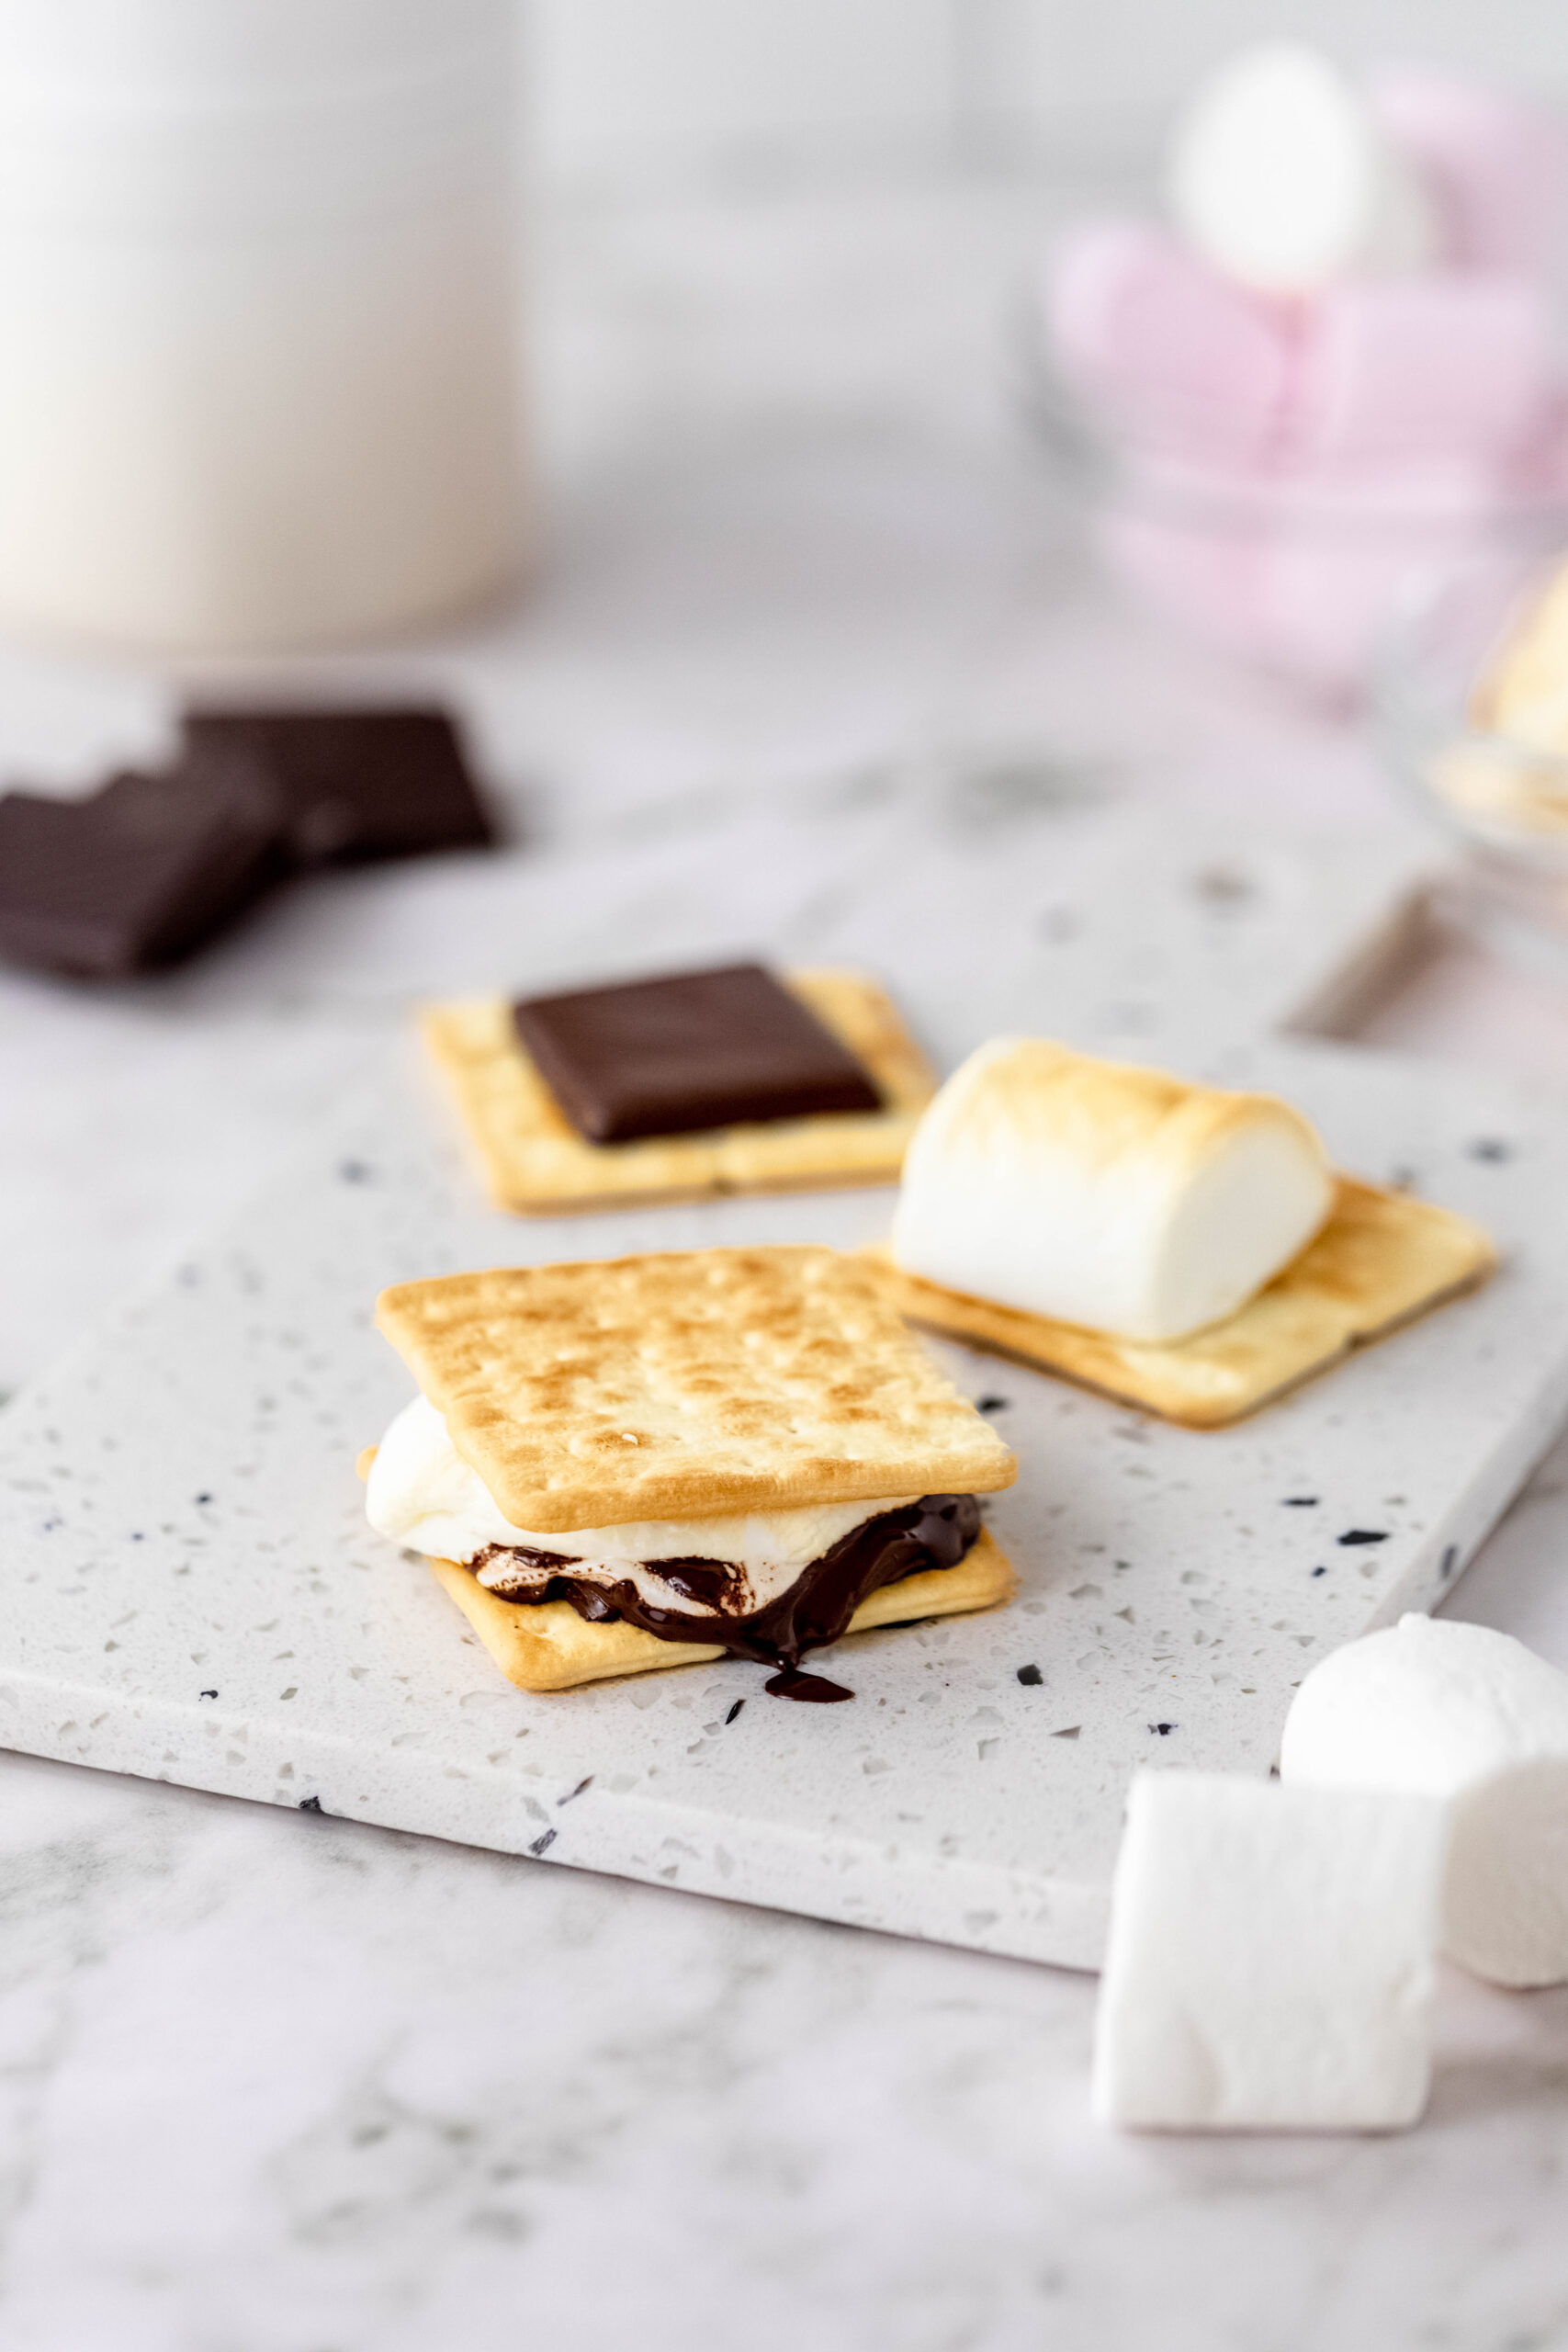 Melty, gooey marshmallow and melted chocolate sandwiched together between graham crackers.